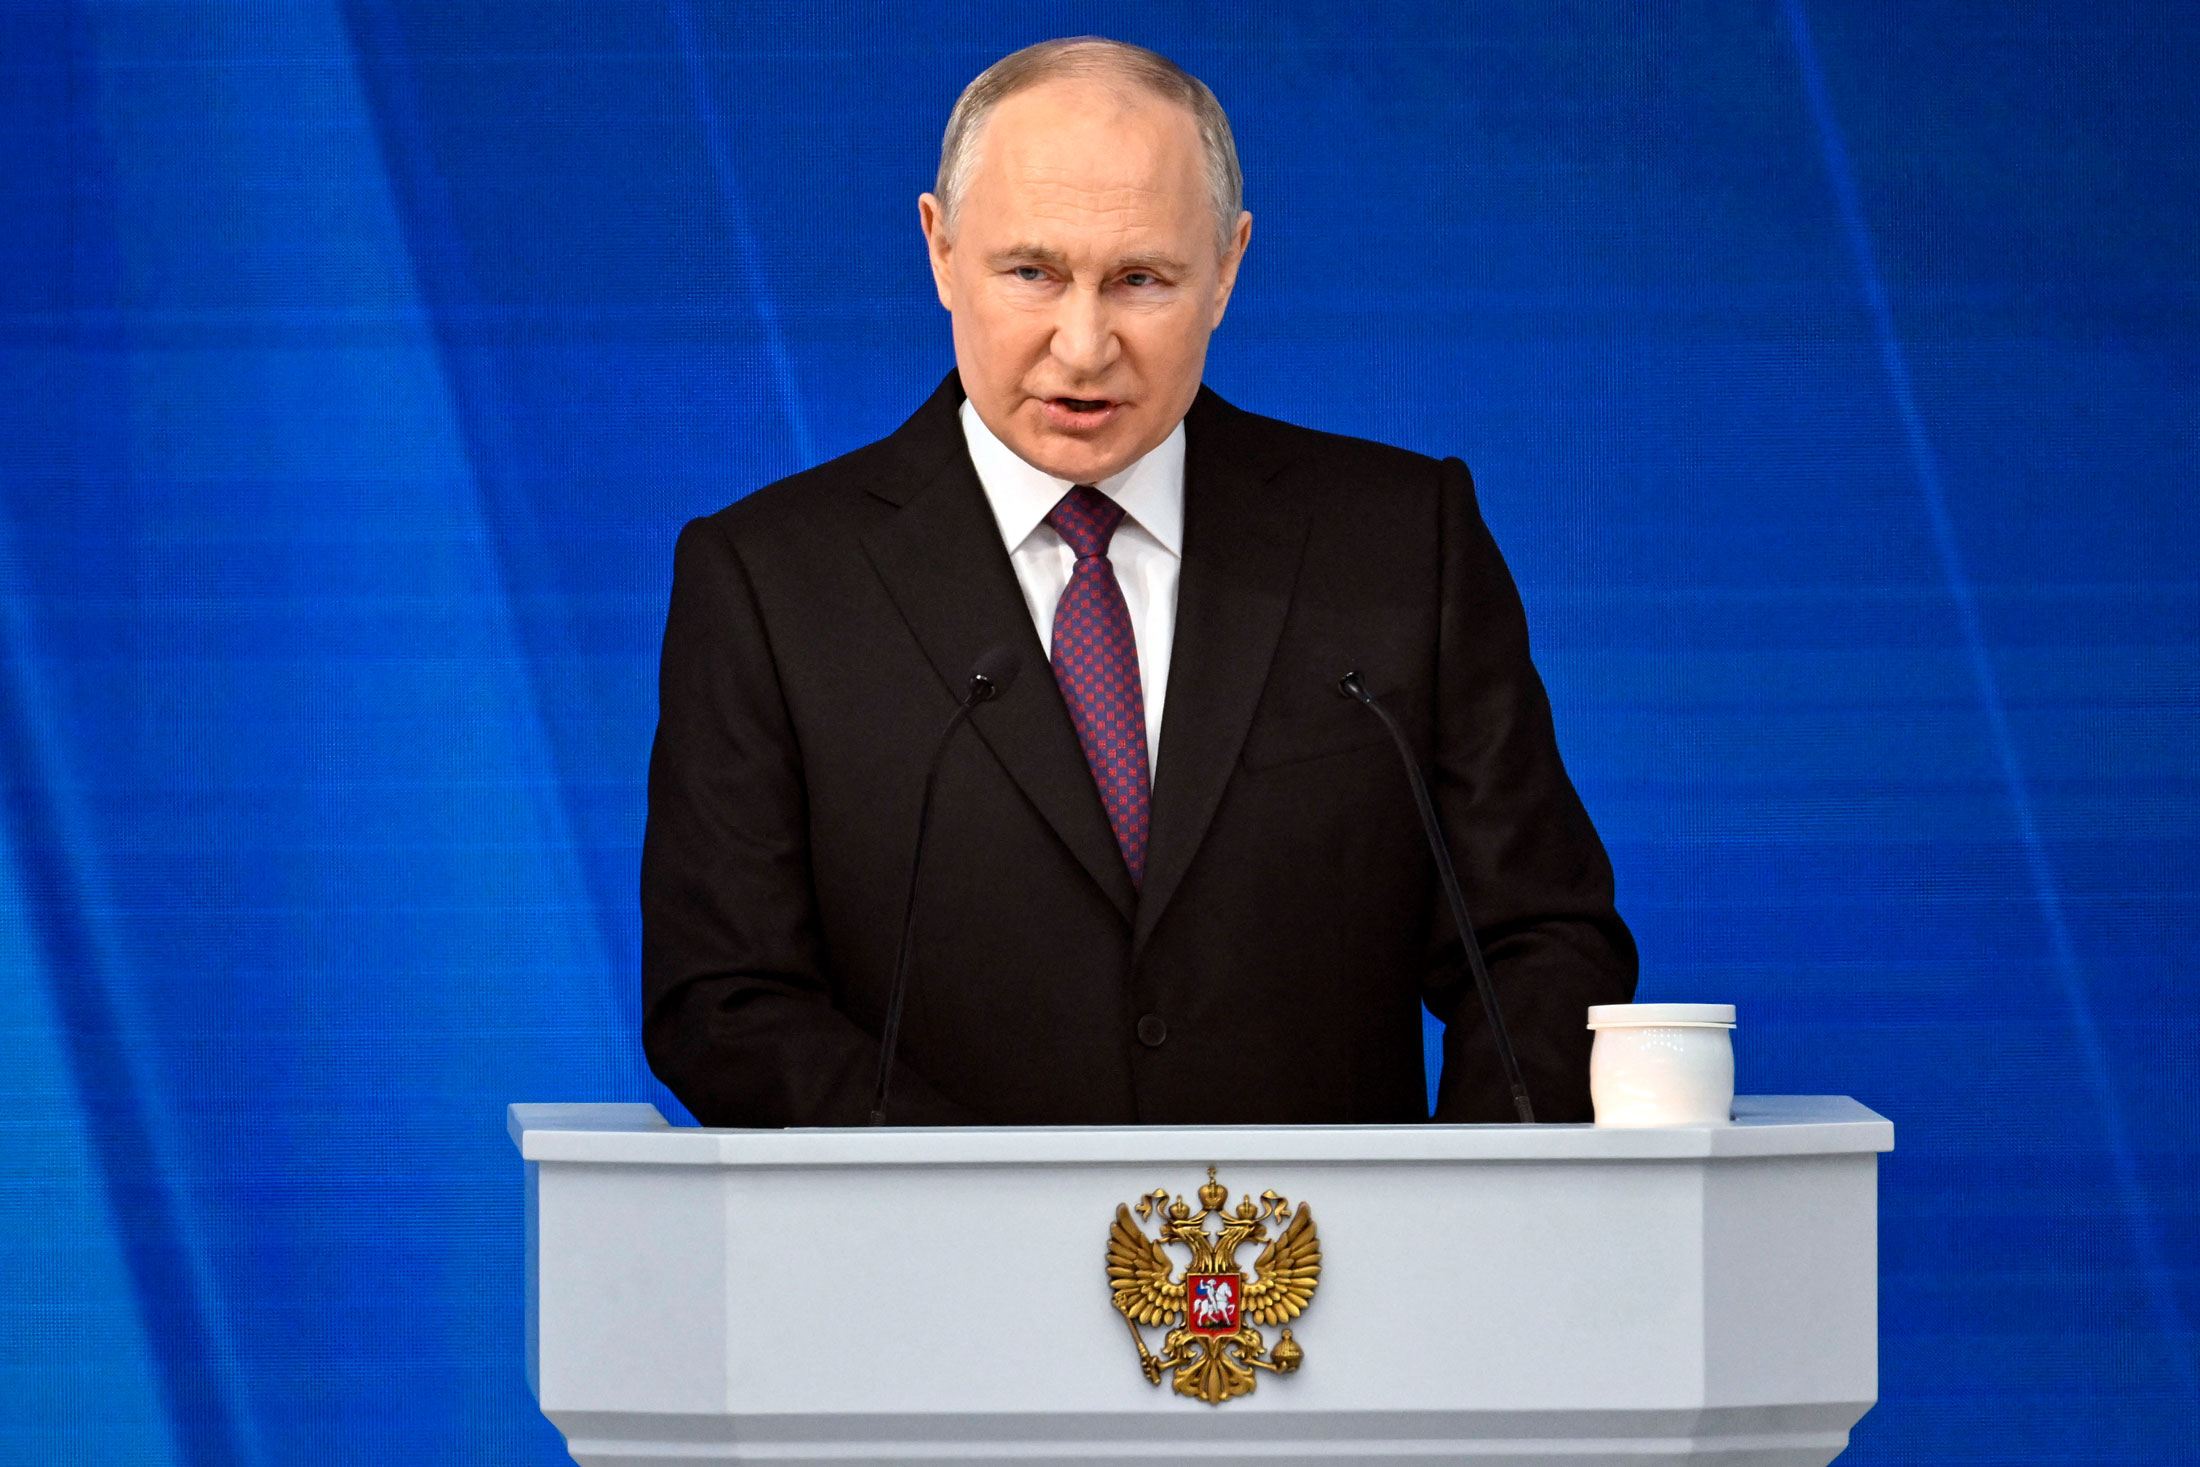 Vladimir Putin delivers an address in Moscow on Feb. 29.